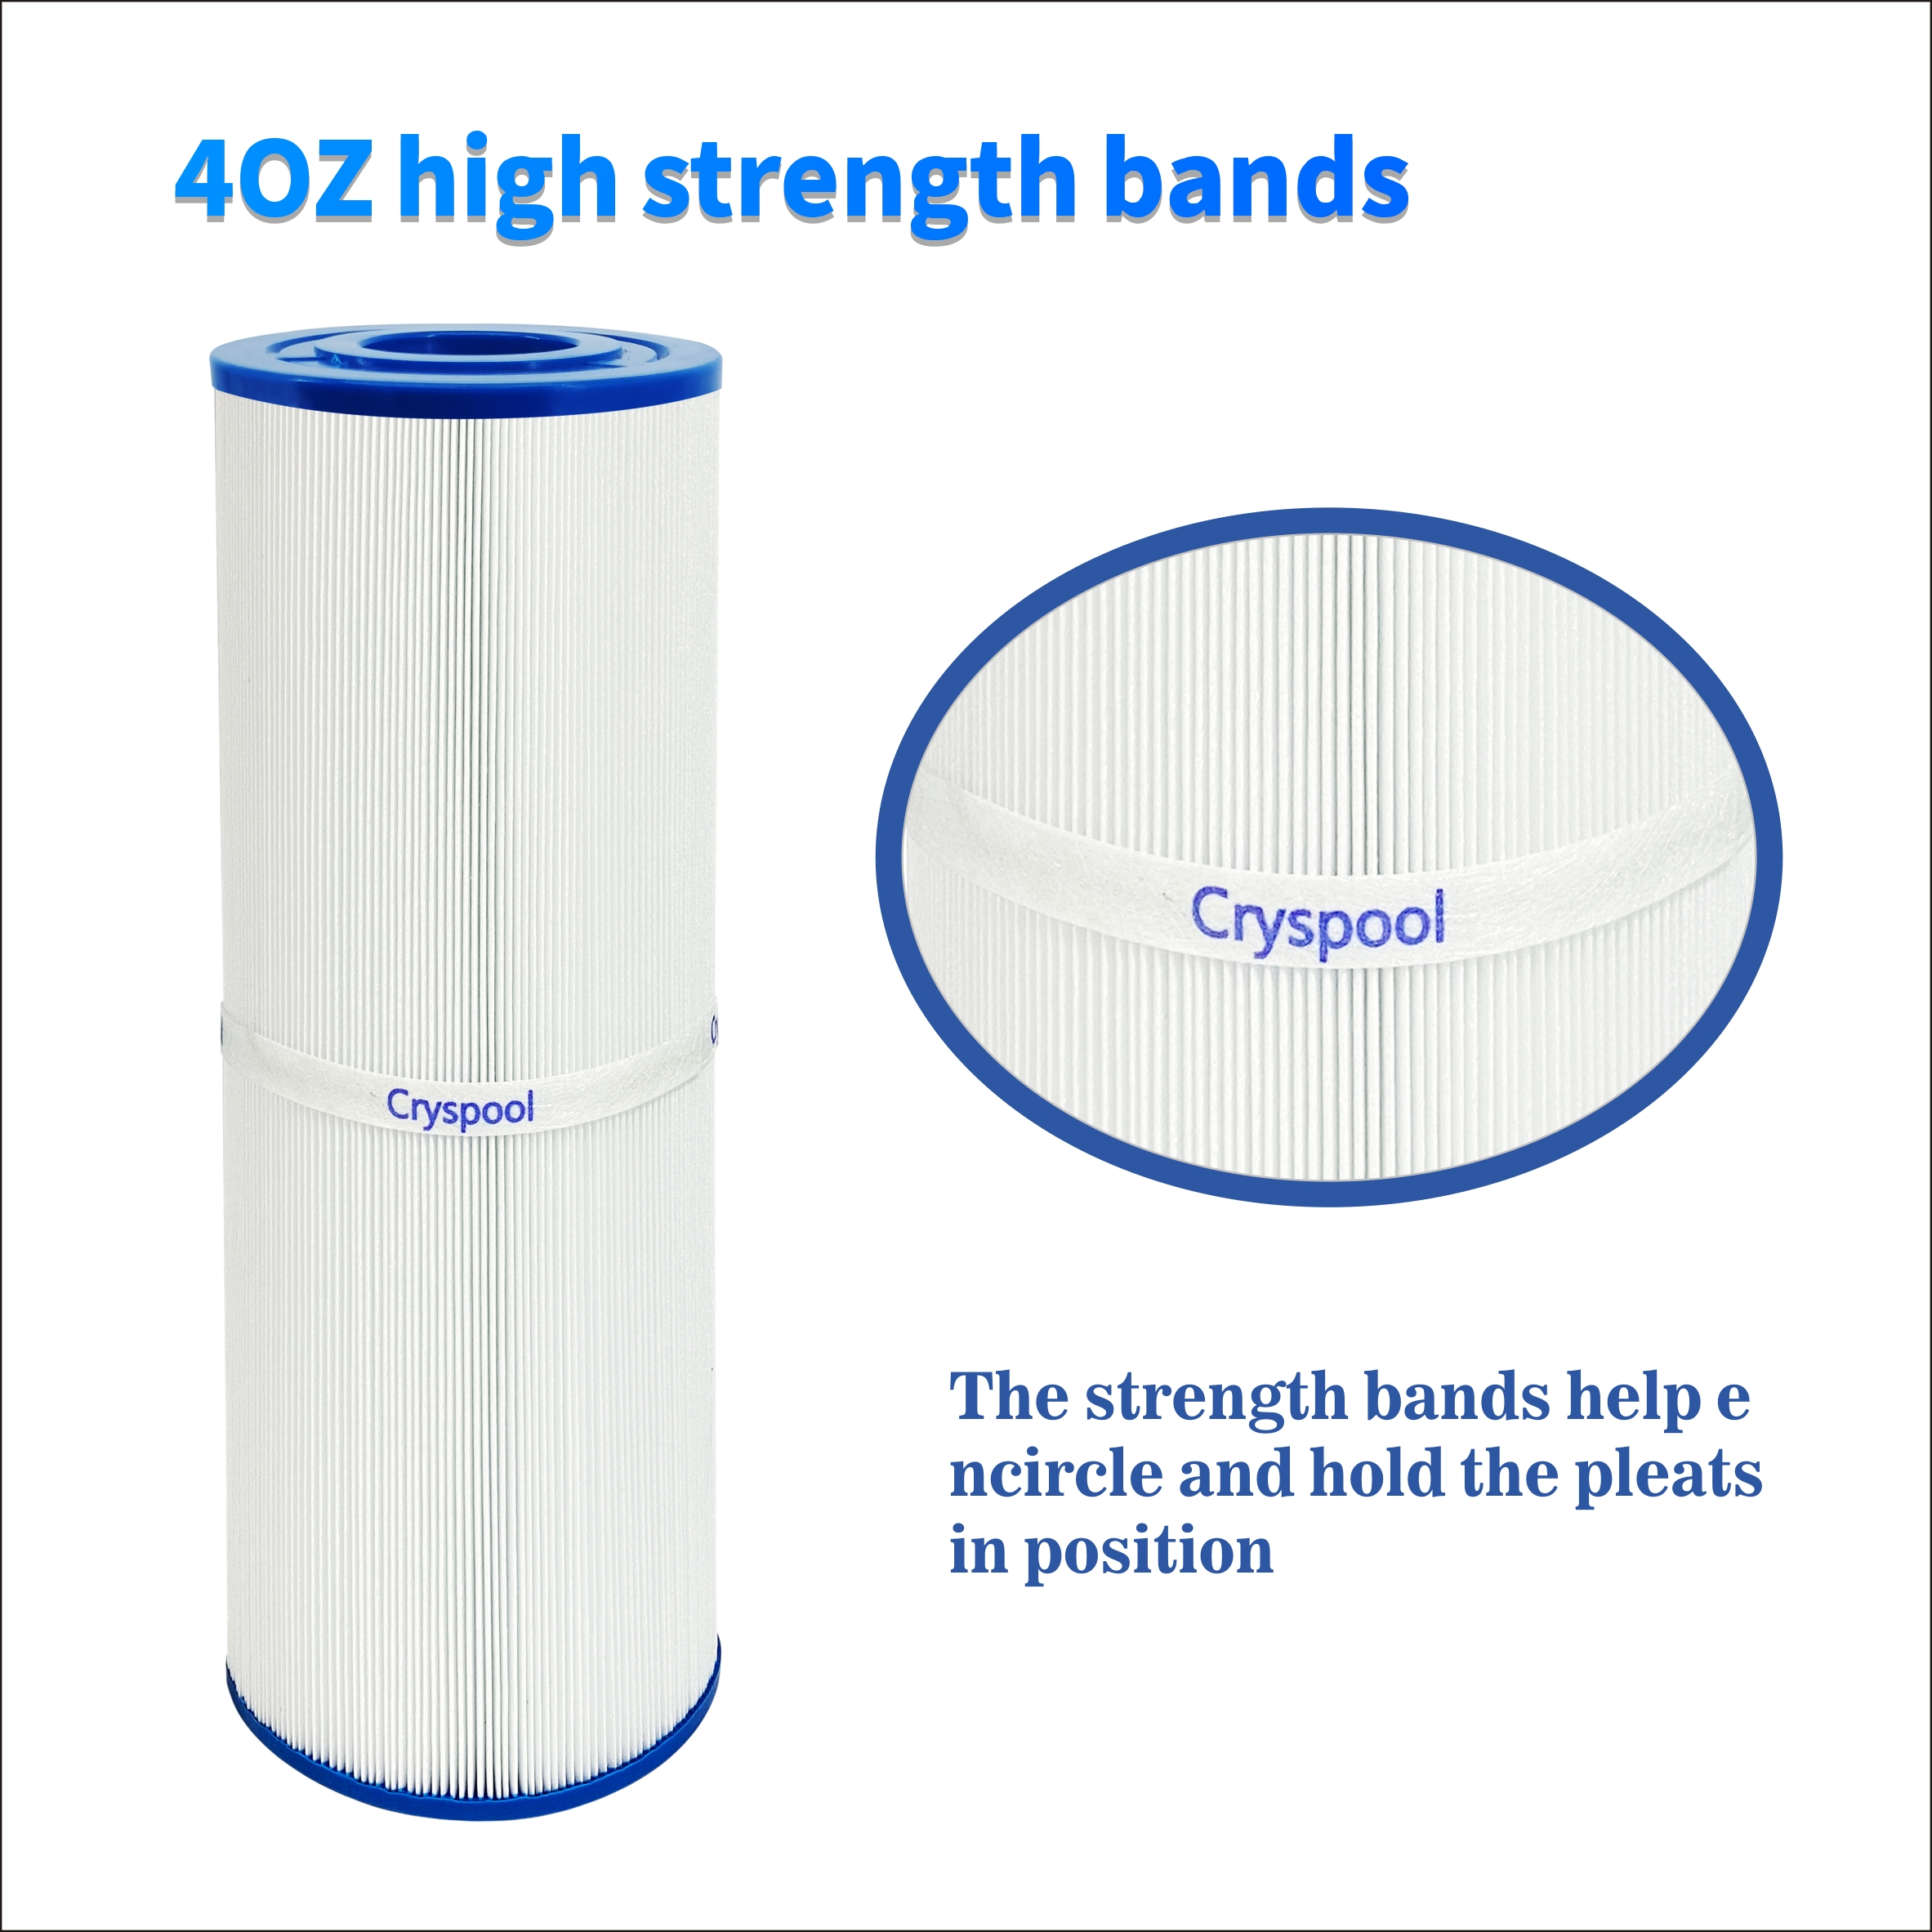 2021 China New Design Clever Spa Filters 8106 - Cyrspool CP-04075 Hot Tub Filter Replacement For Unicel C-4950, Filbur FC-2390, Pleatco PRB50-IN – Cryspool